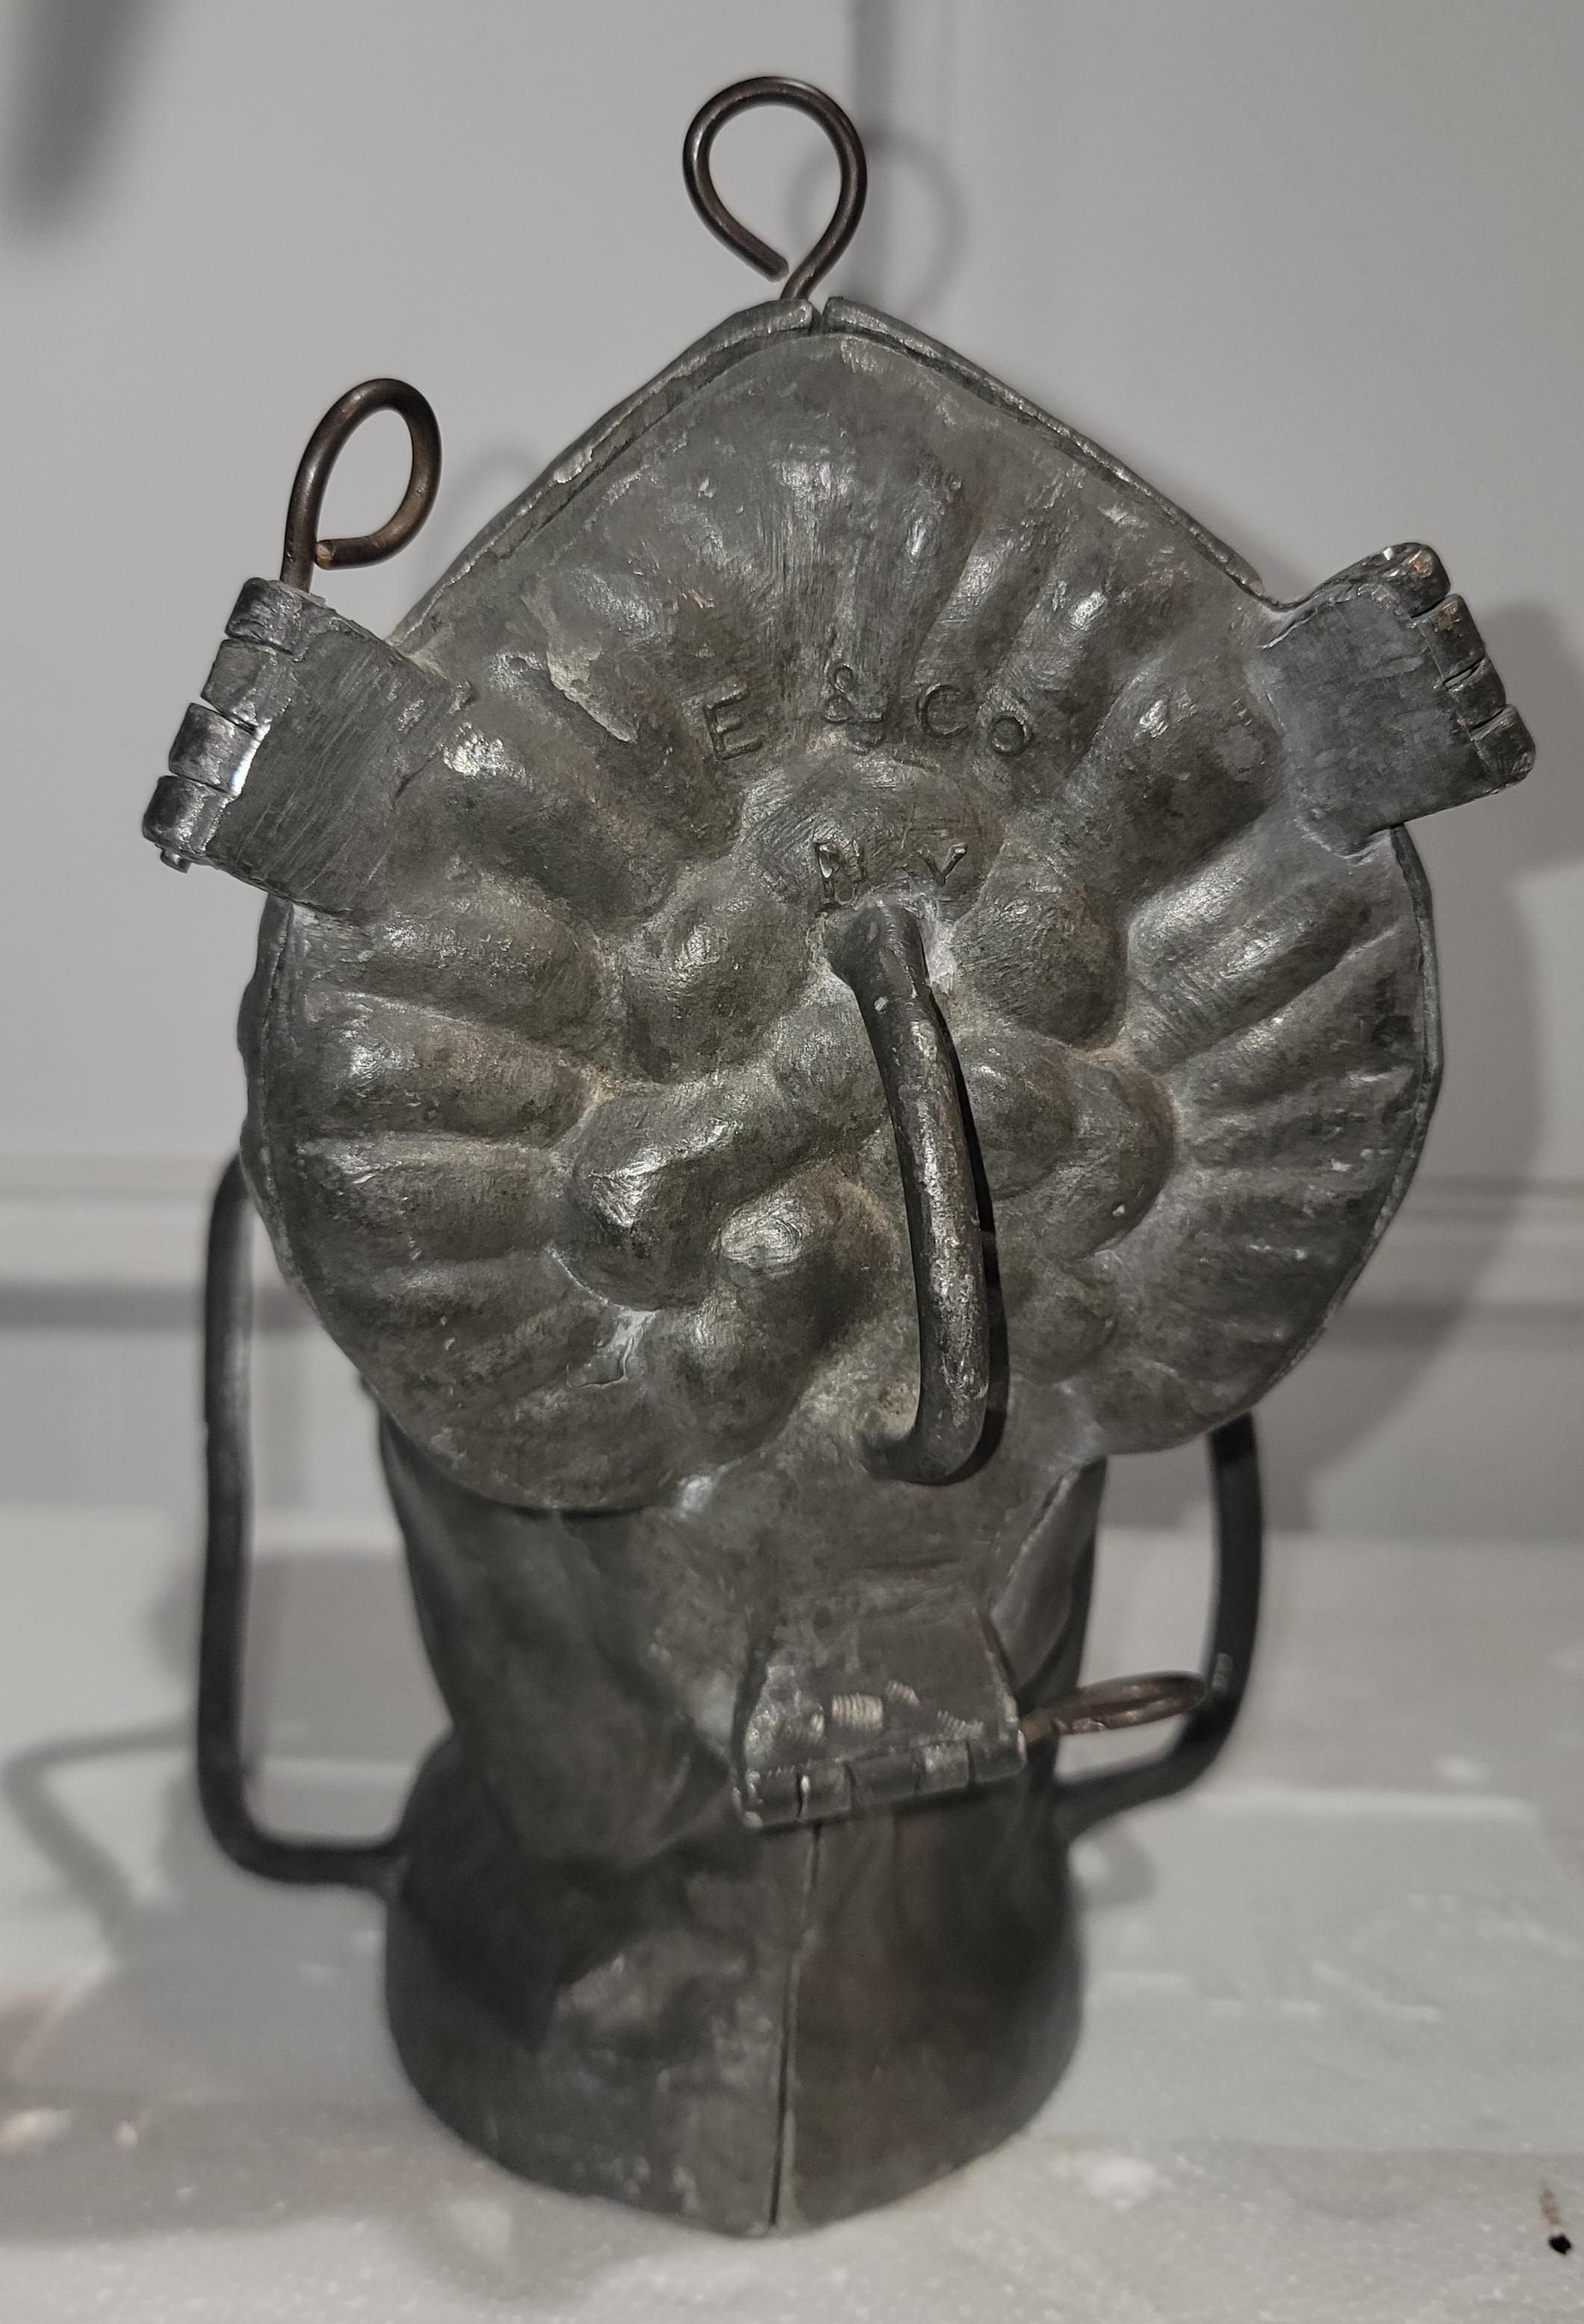 19thc Pewter turkey large chocolate mold and hinged in the middle. The condition is very good and has a wonderful aged patina.